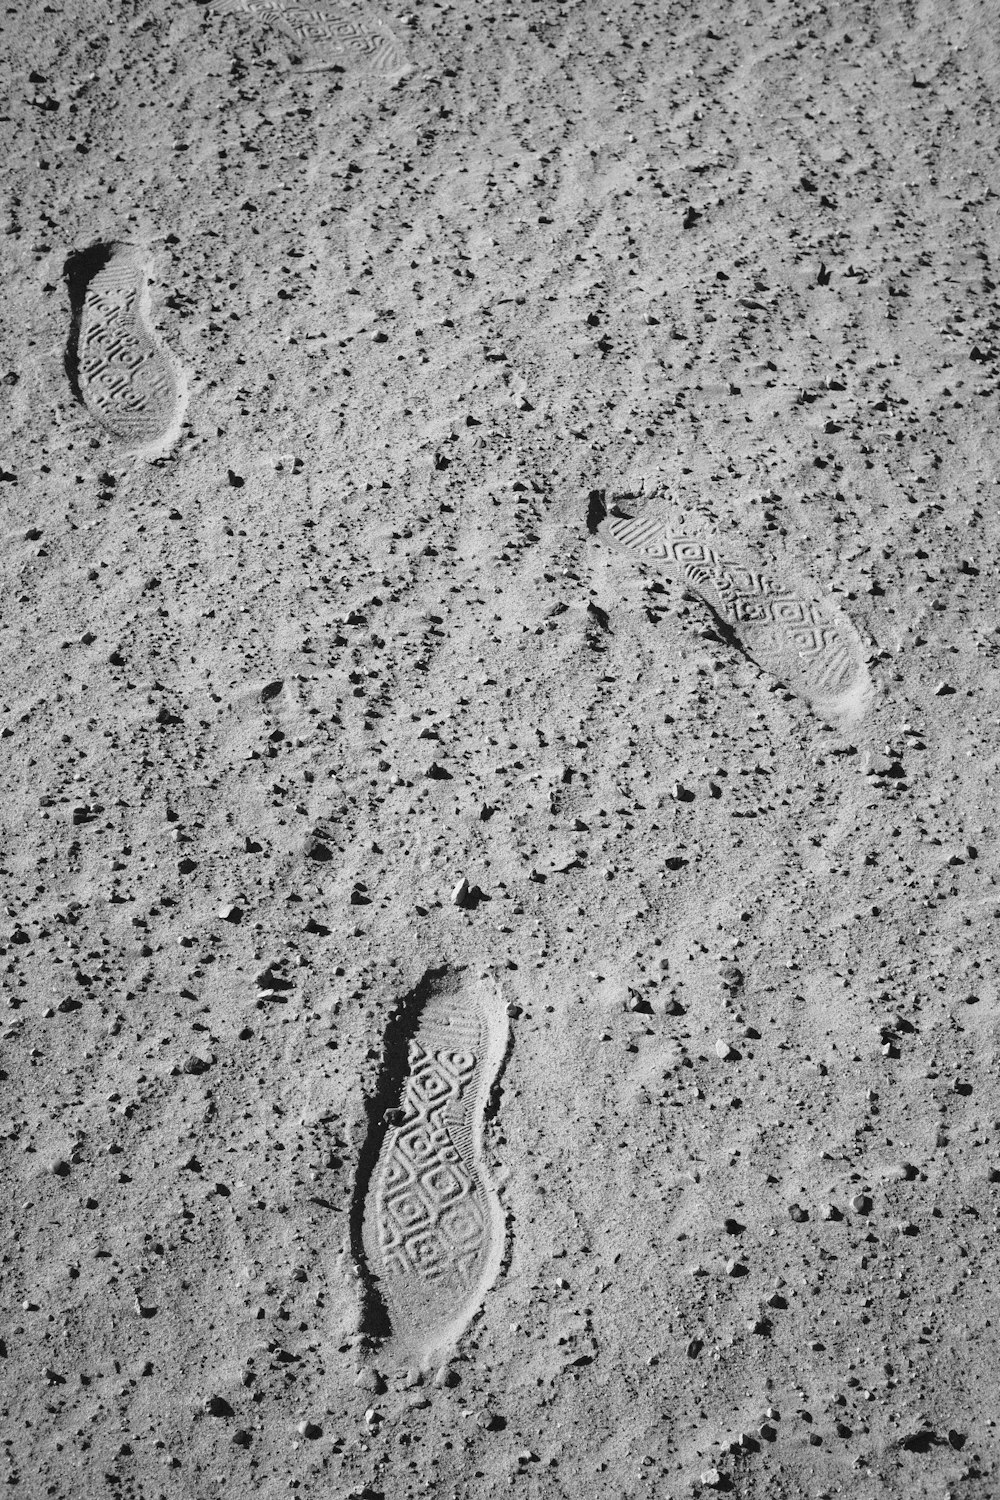 two footprints in the sand of a beach